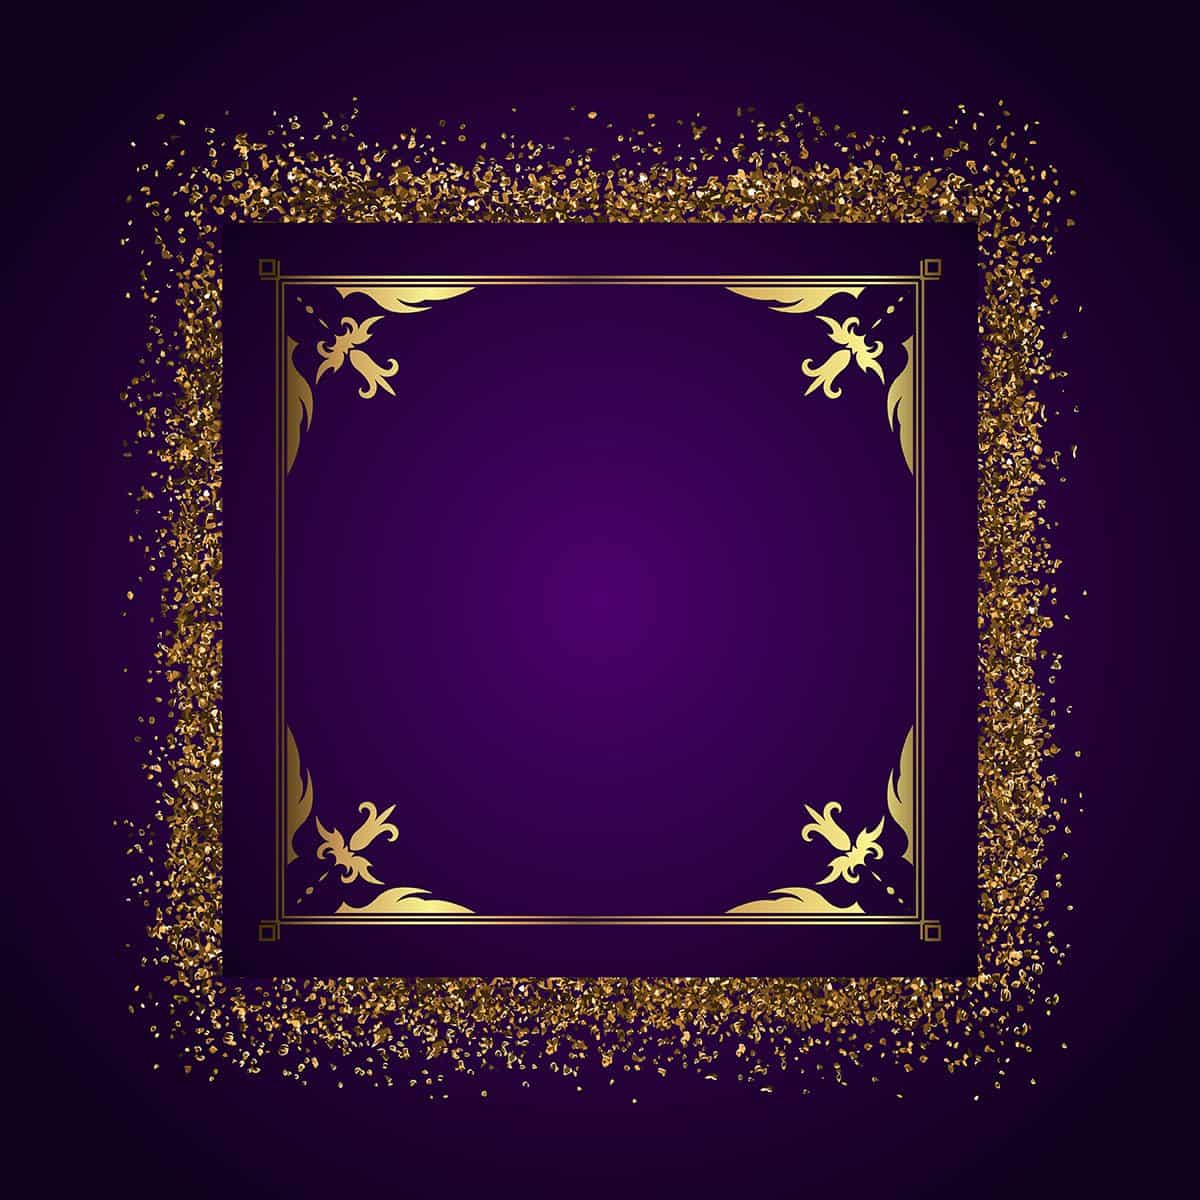 Decorative frame background with gold glitter